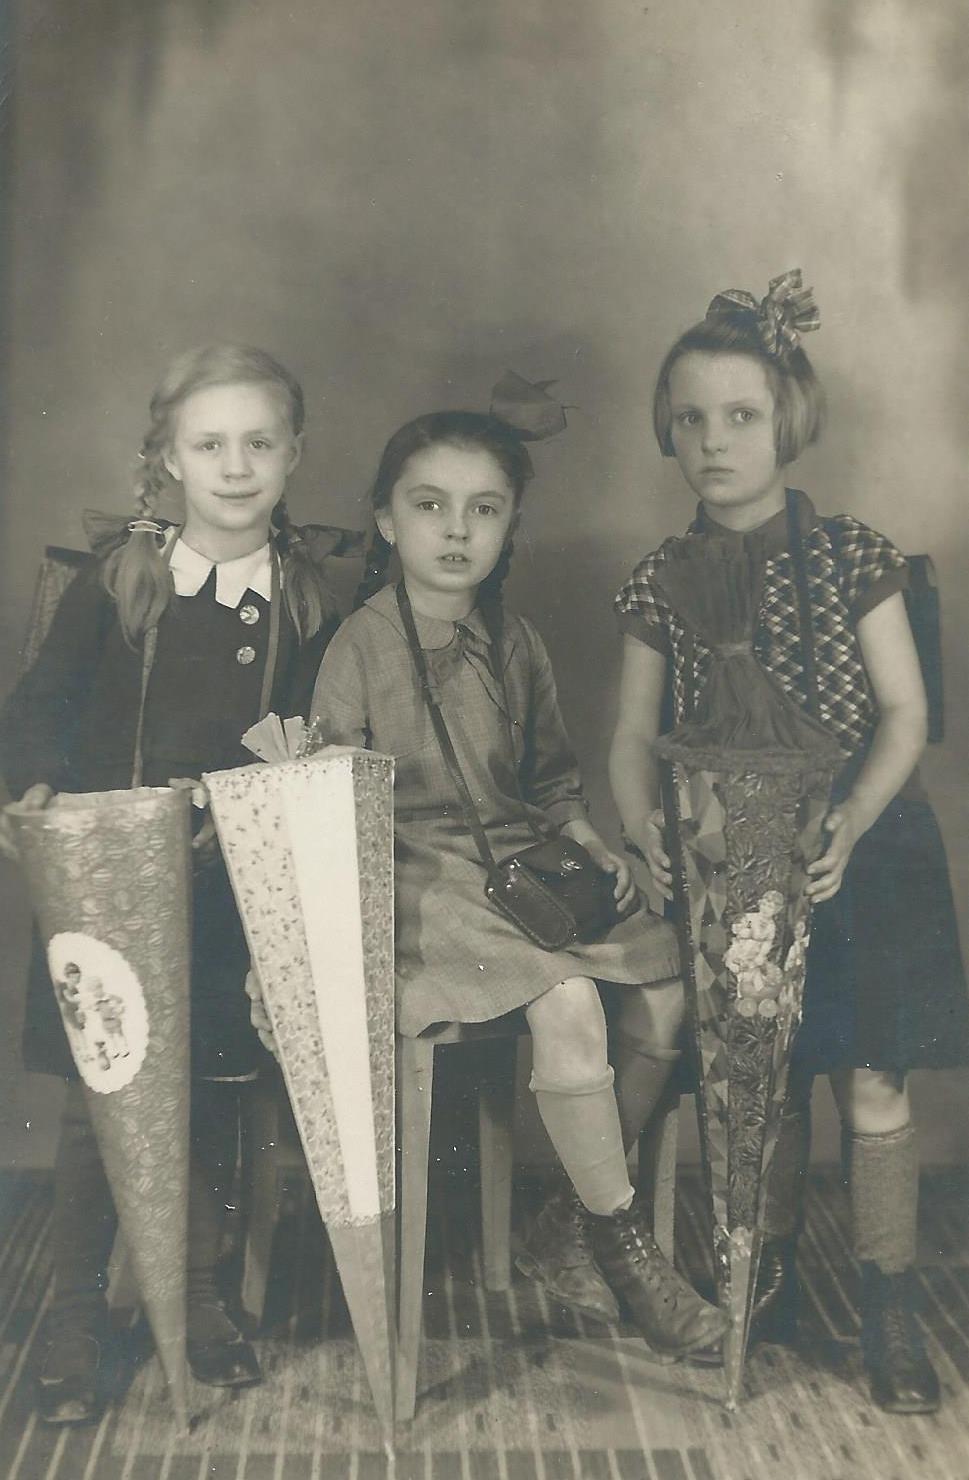 Ruth Weinmann with cousins Rosemary Gunderrman and Johanna May pose with their schultutes